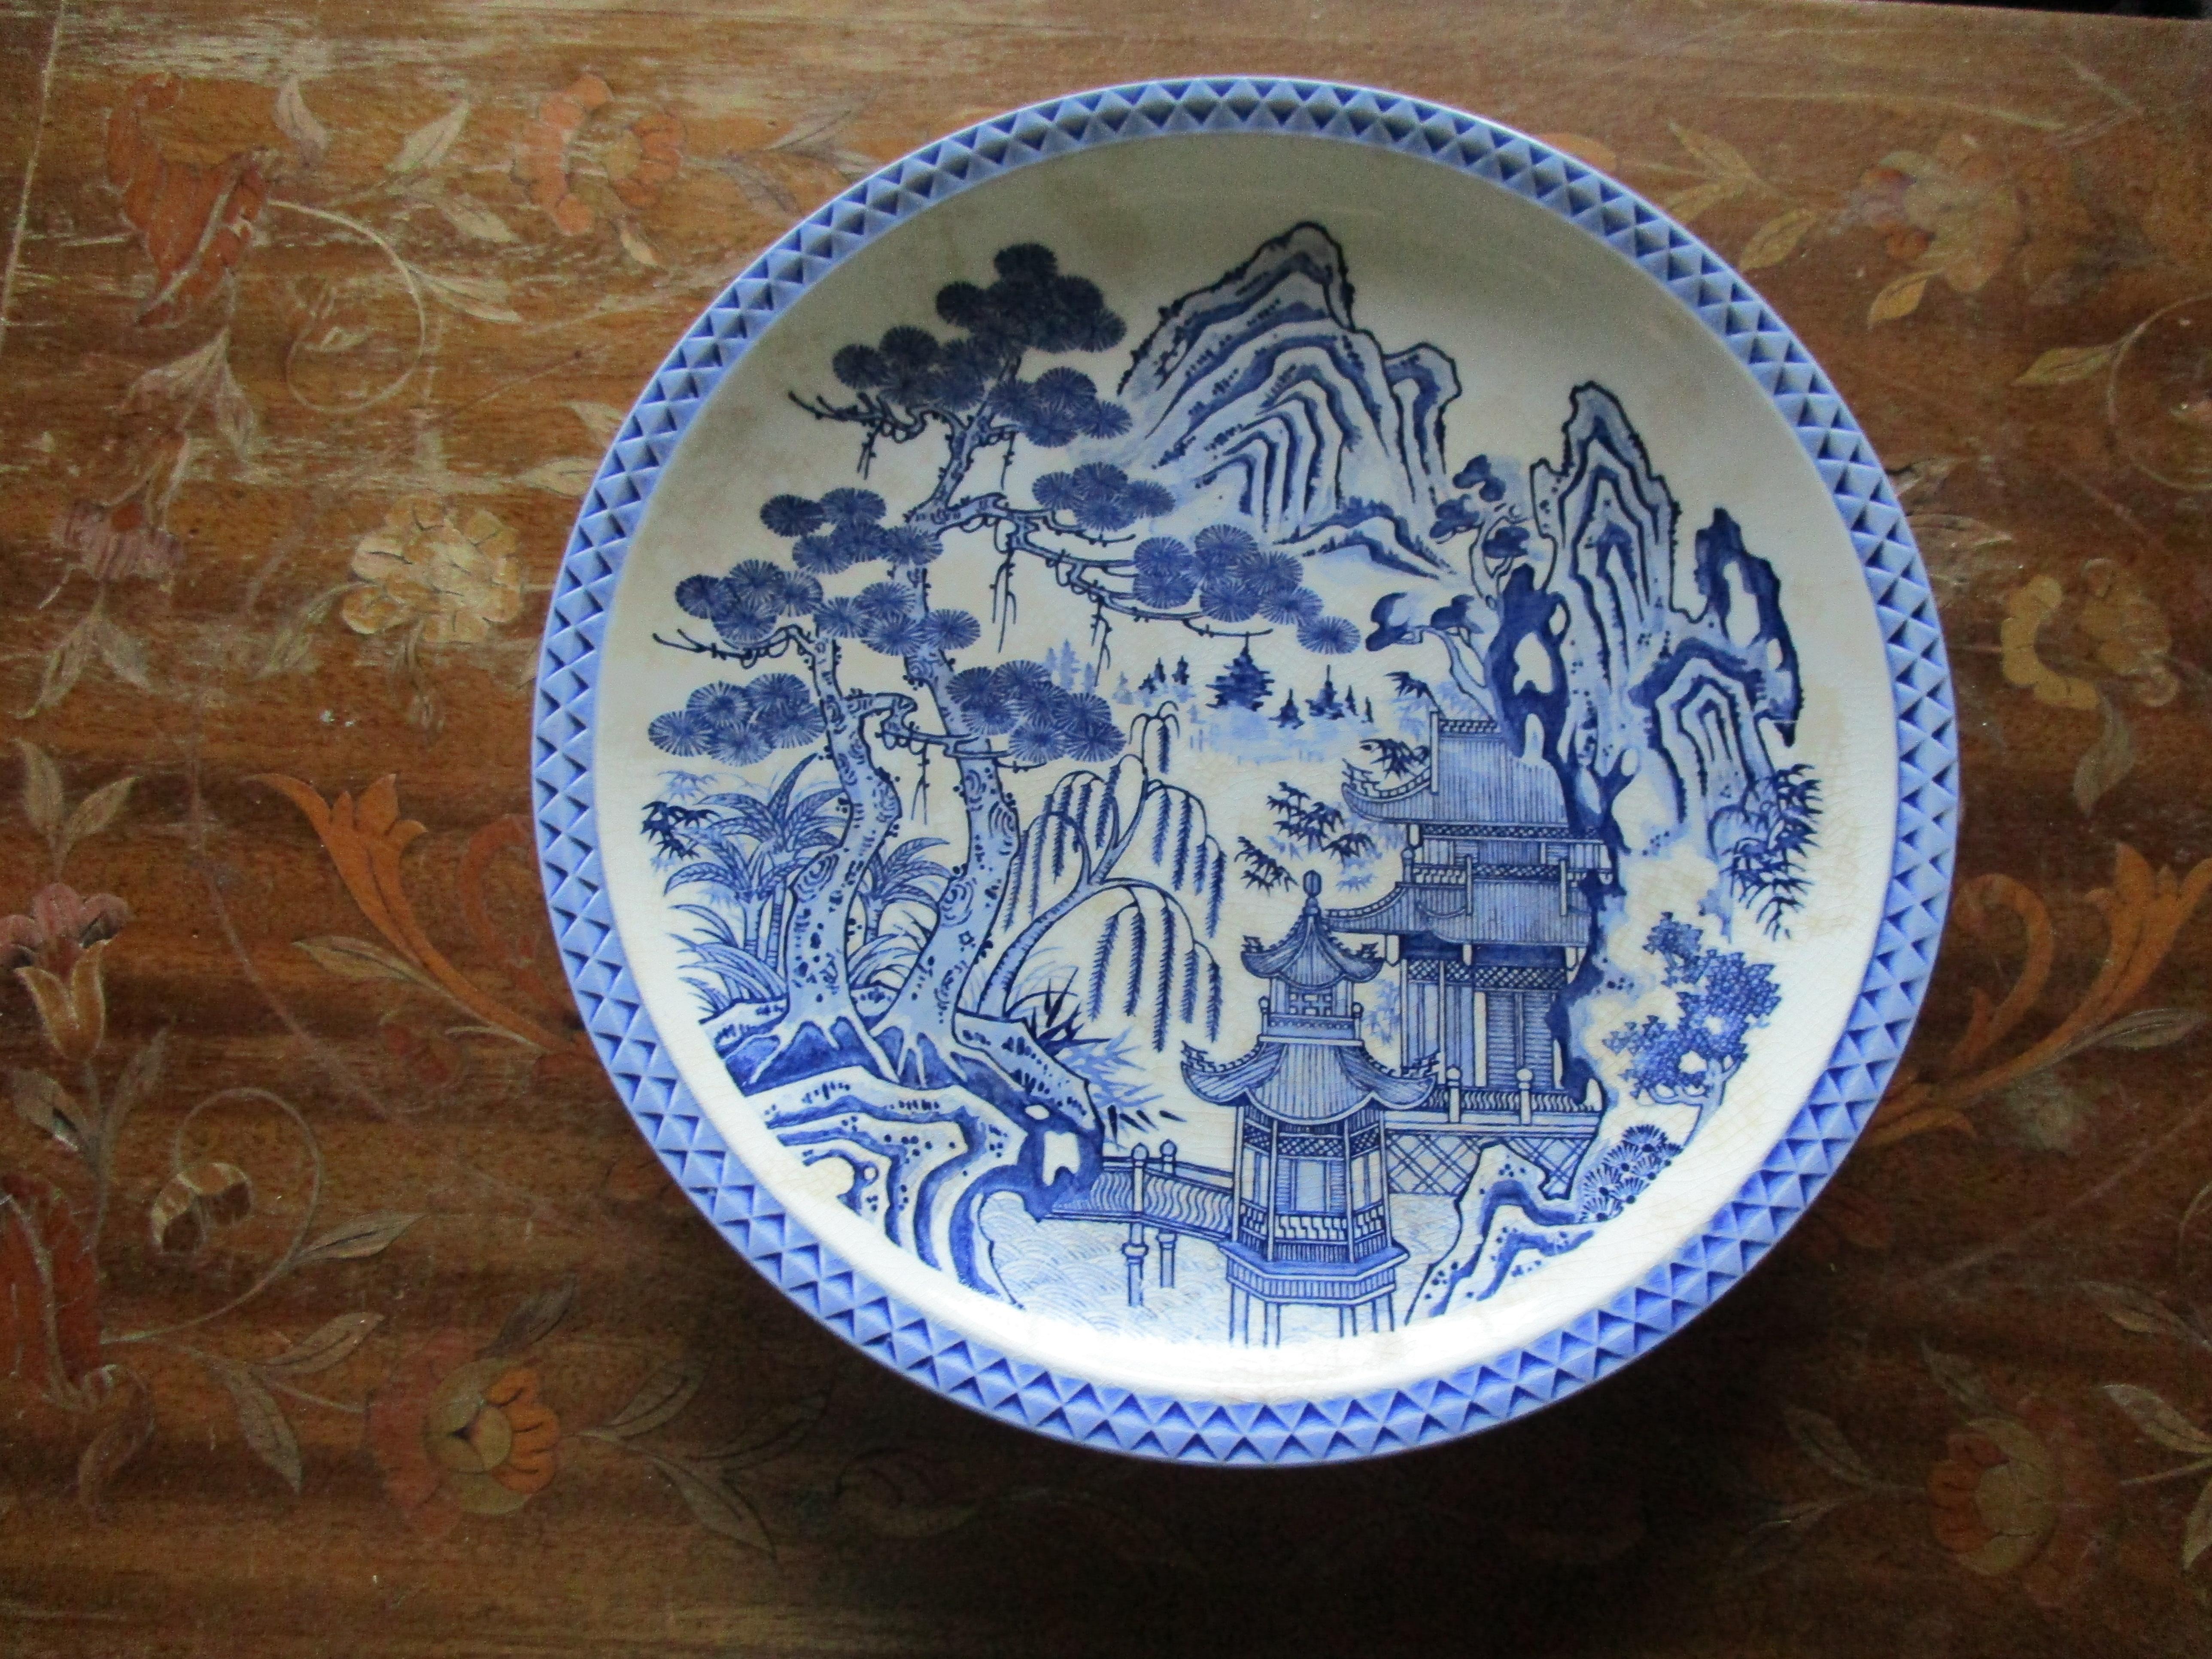 This is a rare blue and white porcelain charger/plate that is 12 inches in diameter. The backdrop is detailed with a pagoda, a footbridge, mountains and a whimsical blue willow tree. This vintage Chinese export blue and white porcelain charger 
is